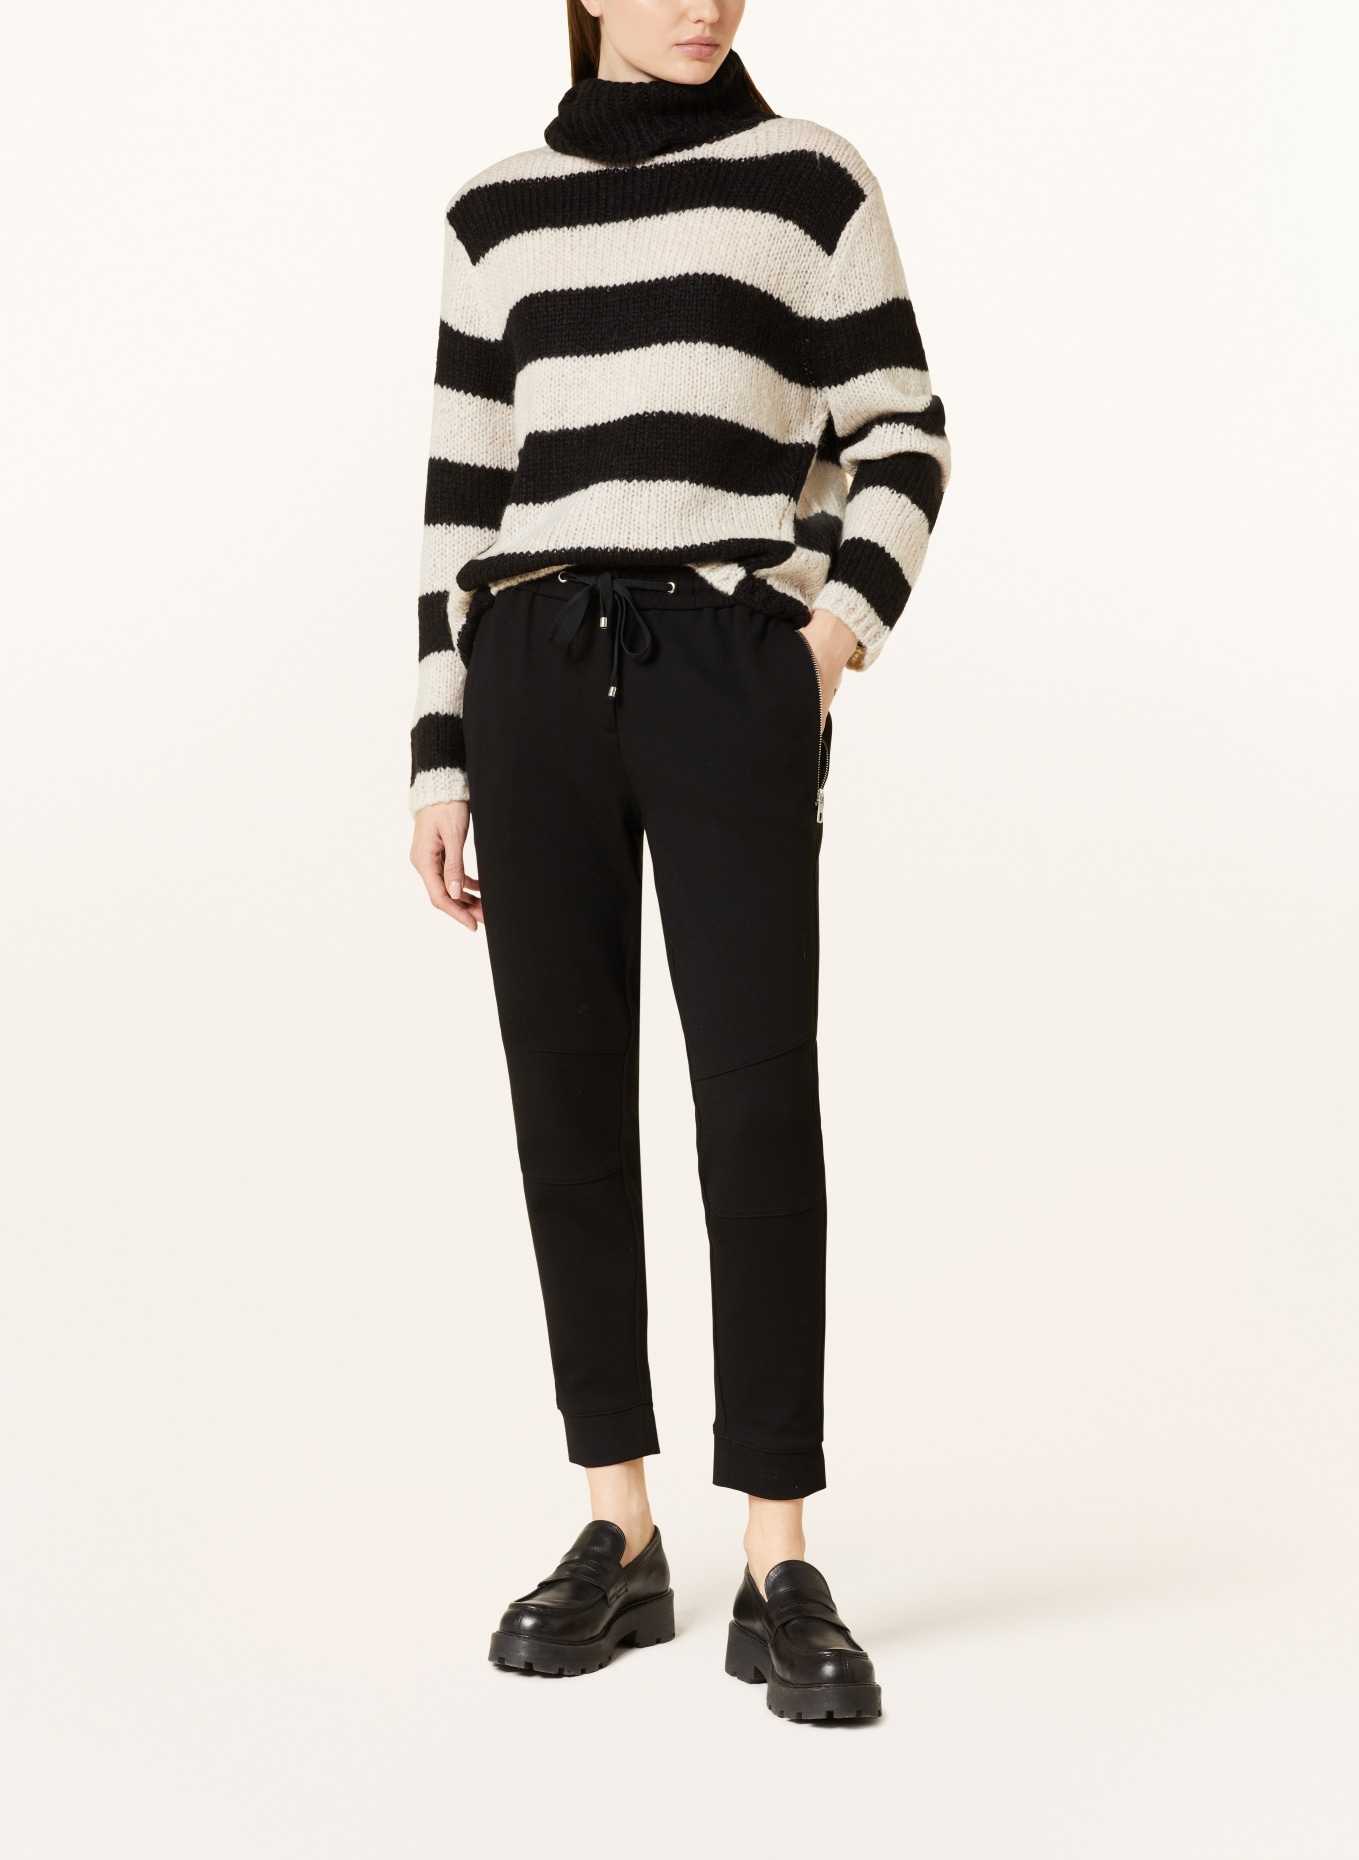 Marc O'Polo Pants in jogger style, Color: BLACK (Image 2)